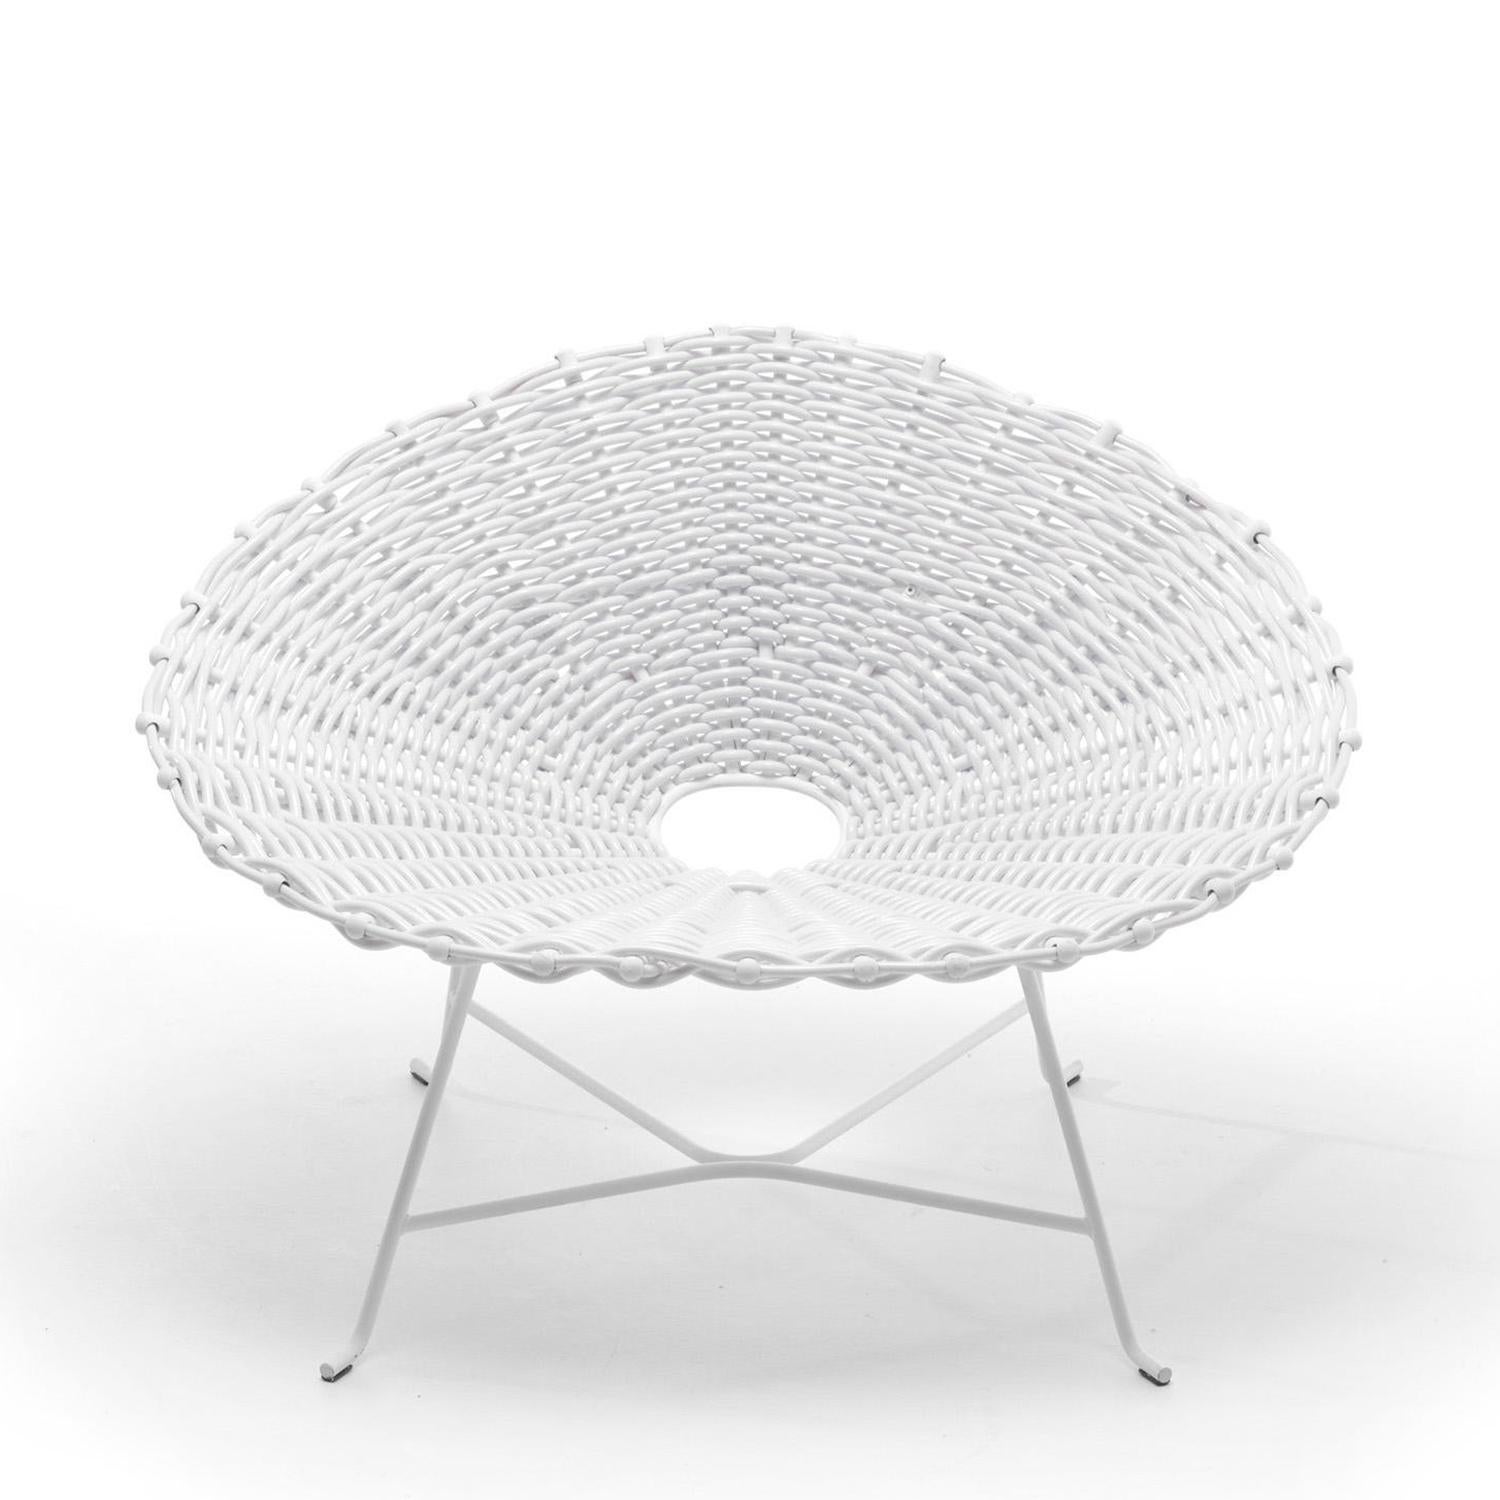 Armchair Nest White Indoor-Outdoor with base feet in
white lacquered matt finish and seat in
glossy white woven PVC.
Also available in Nest Black, on request with base feet
in black lacquered finish and seat in matt black
woven PVC. Indoor-outdoor